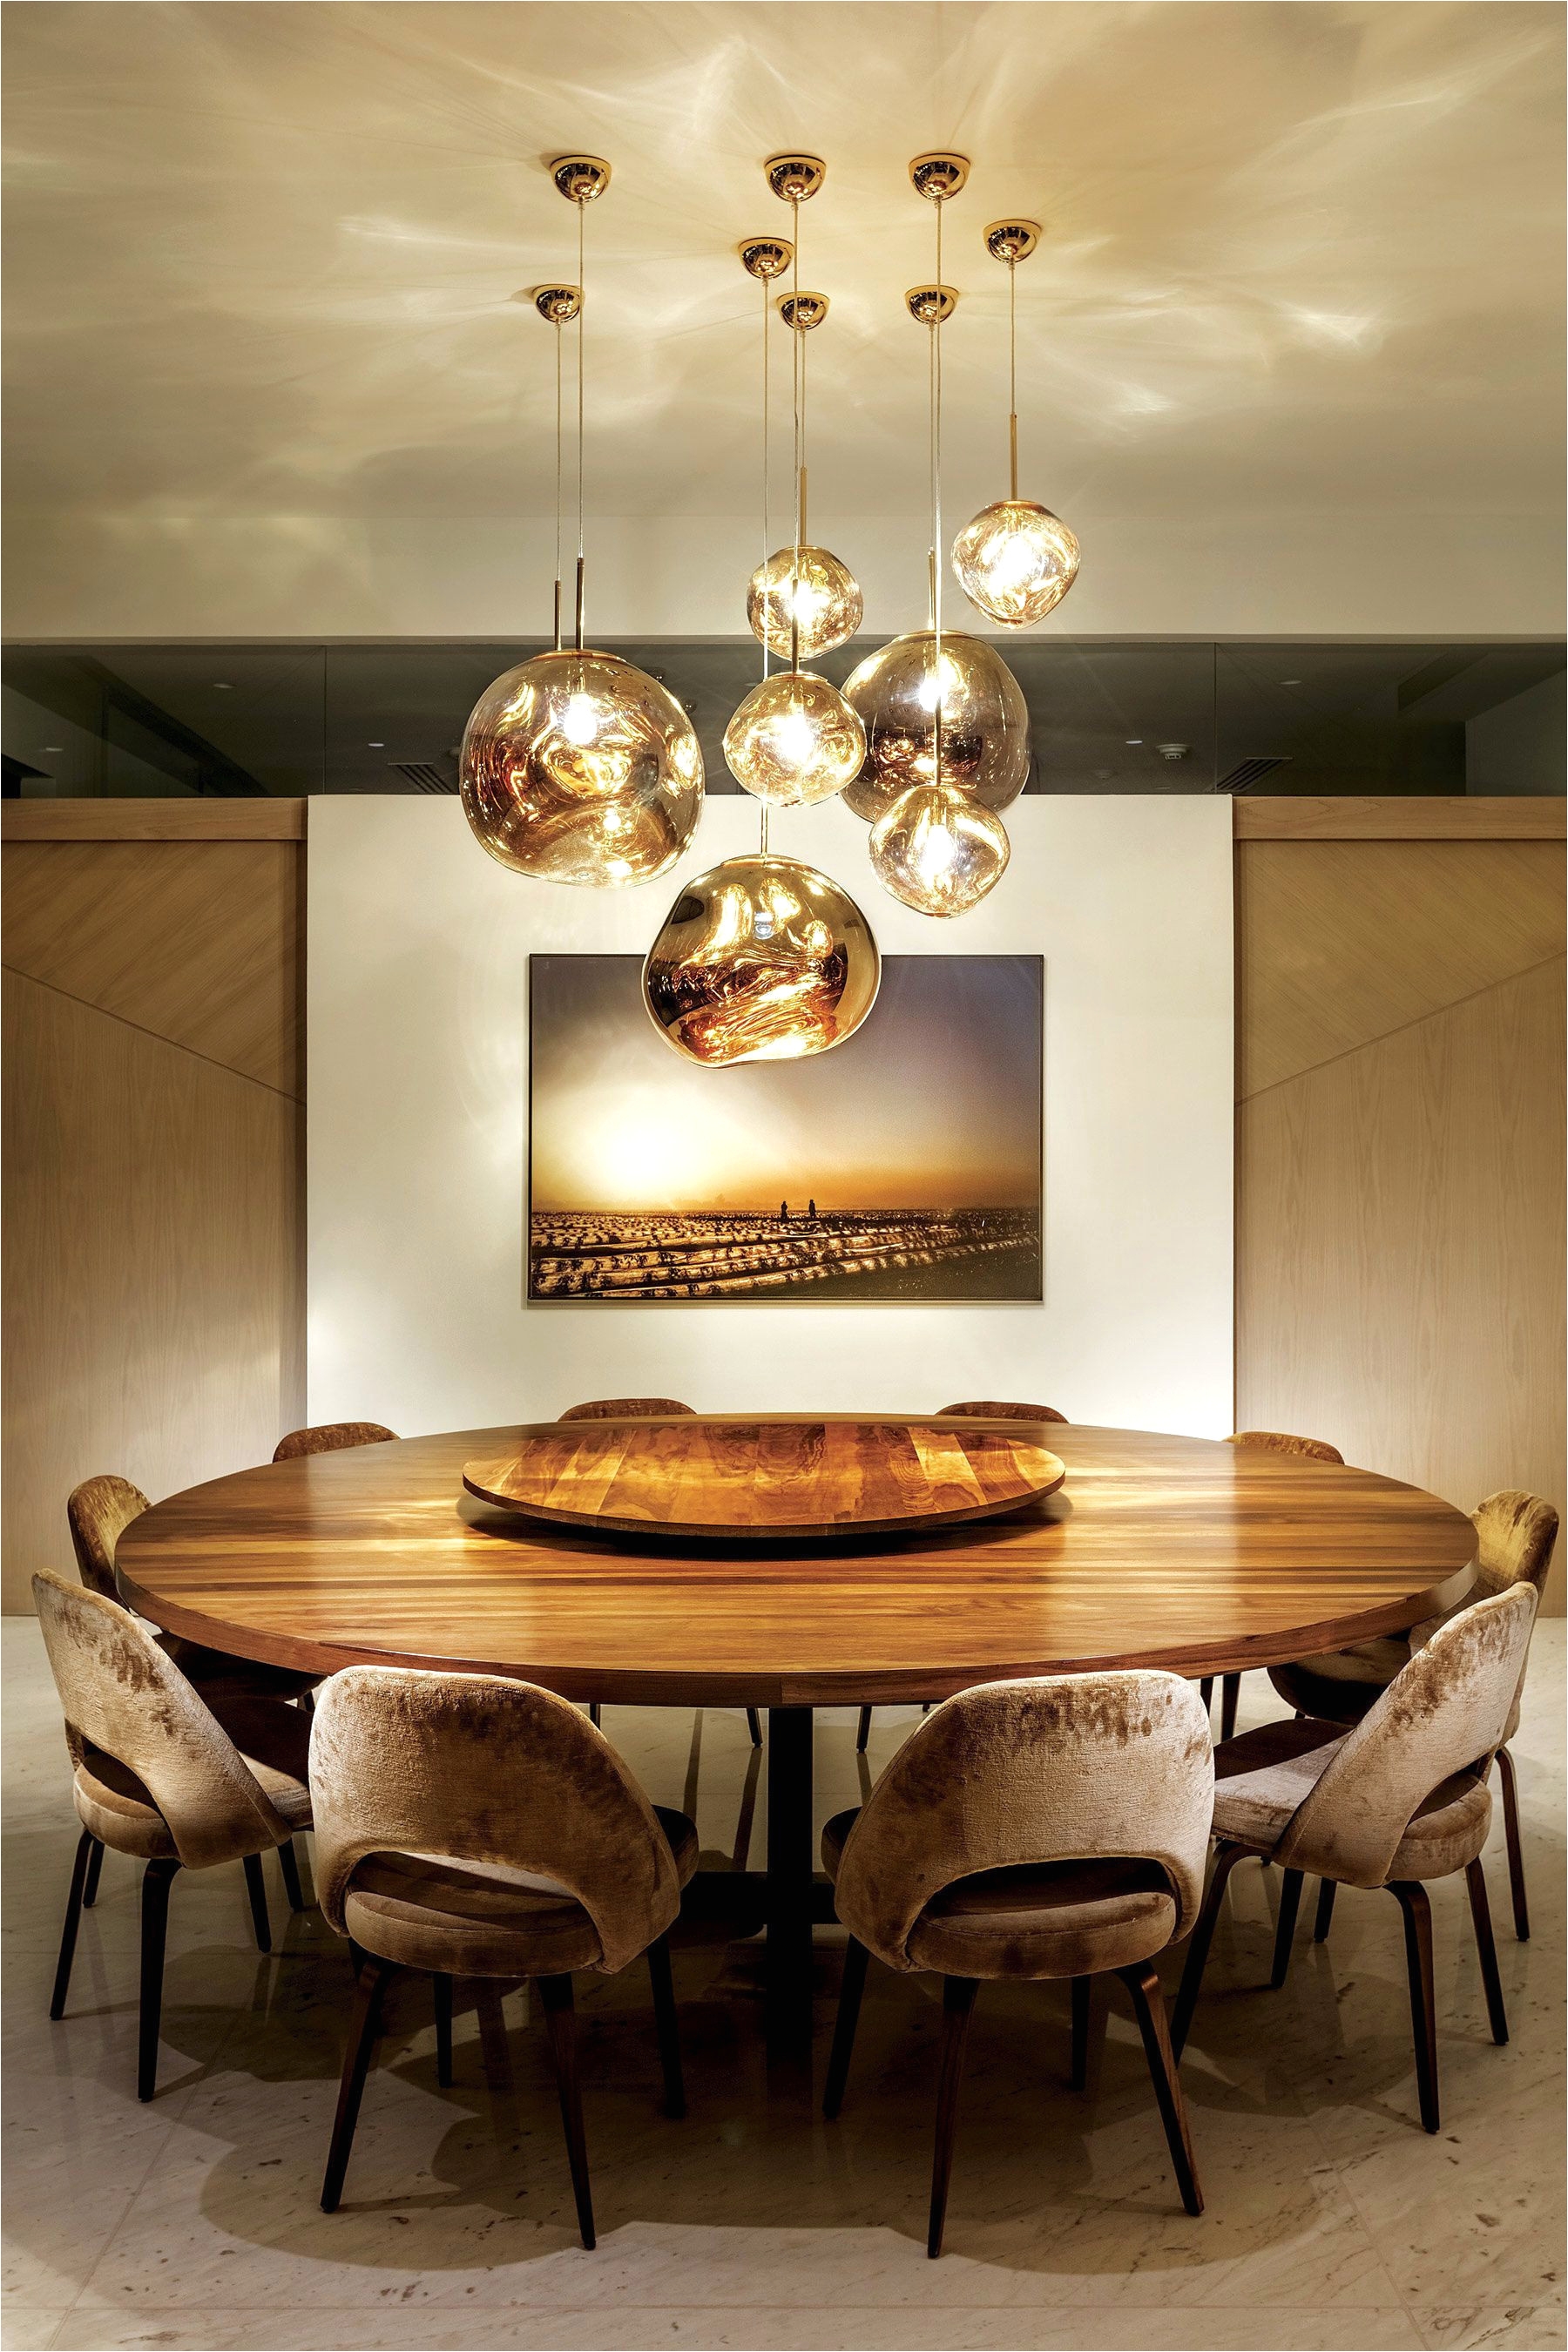 glamorous barn wood dining room table at white rustic kitchen table new inspirational lighting lighting 0d